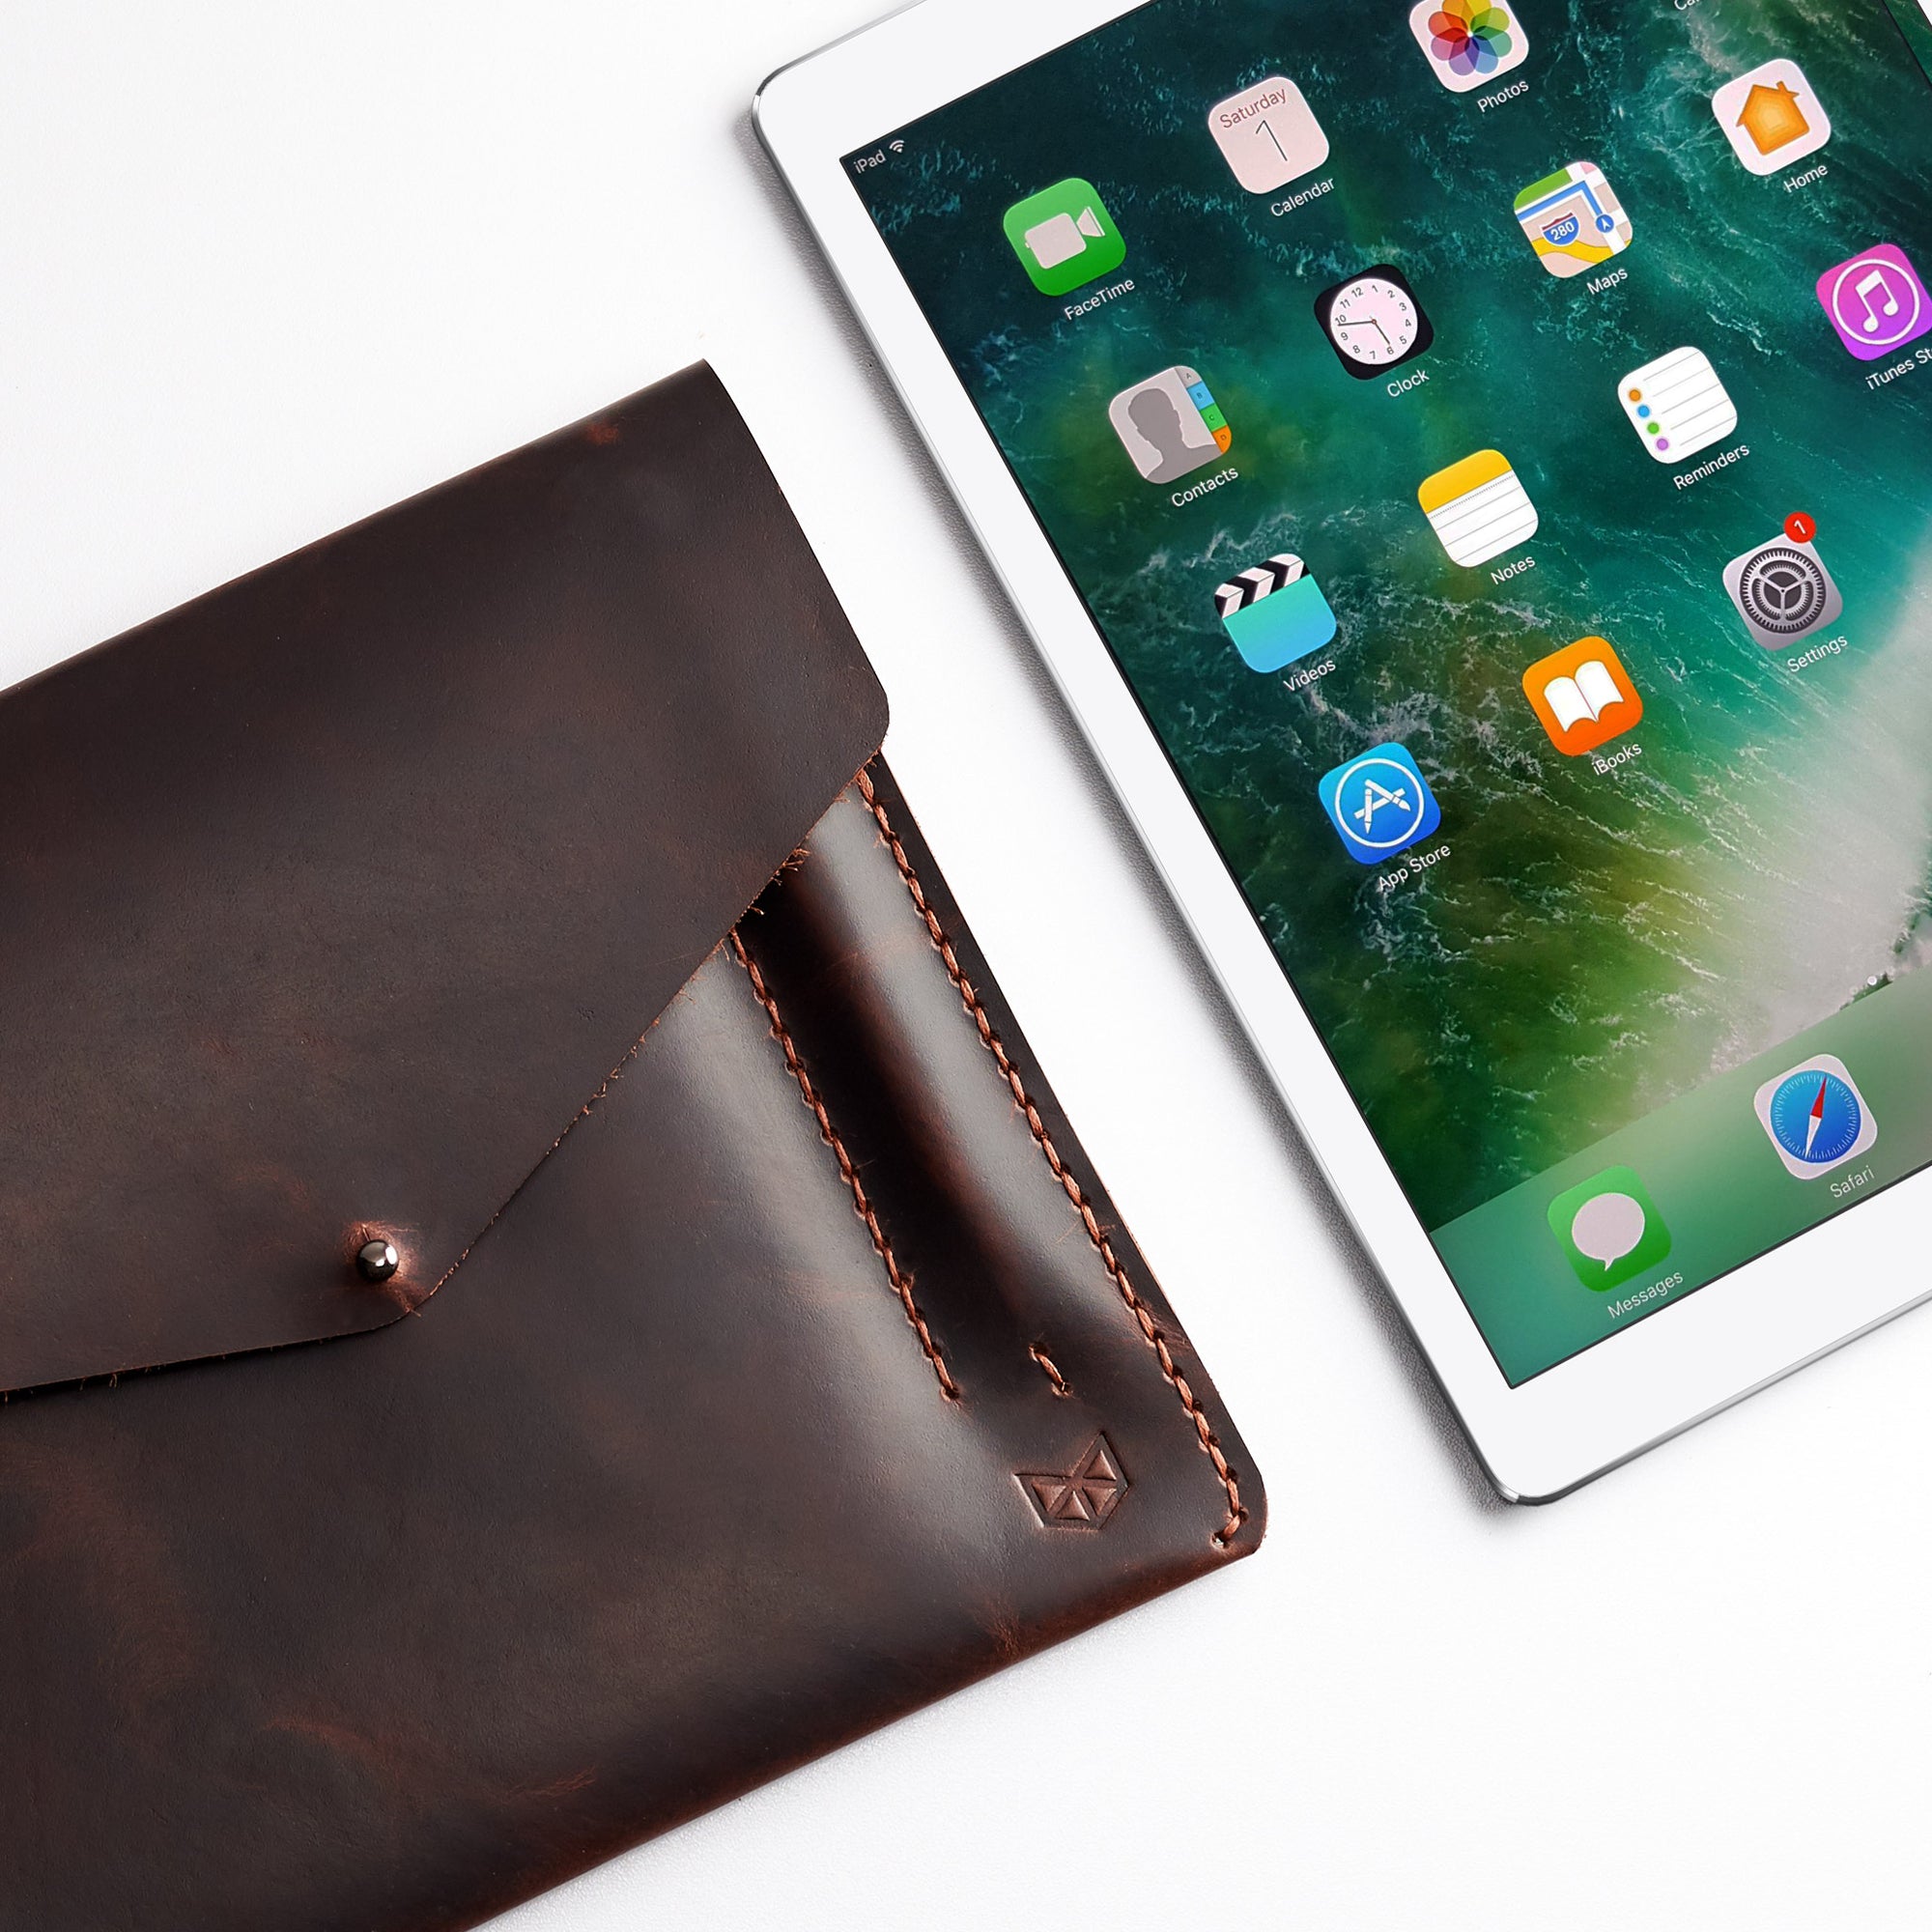 Apple Accessories. iPad Sleeve. iPad Leather Case Distressed Cognac With Apple Pencil Holder by Capra Leather